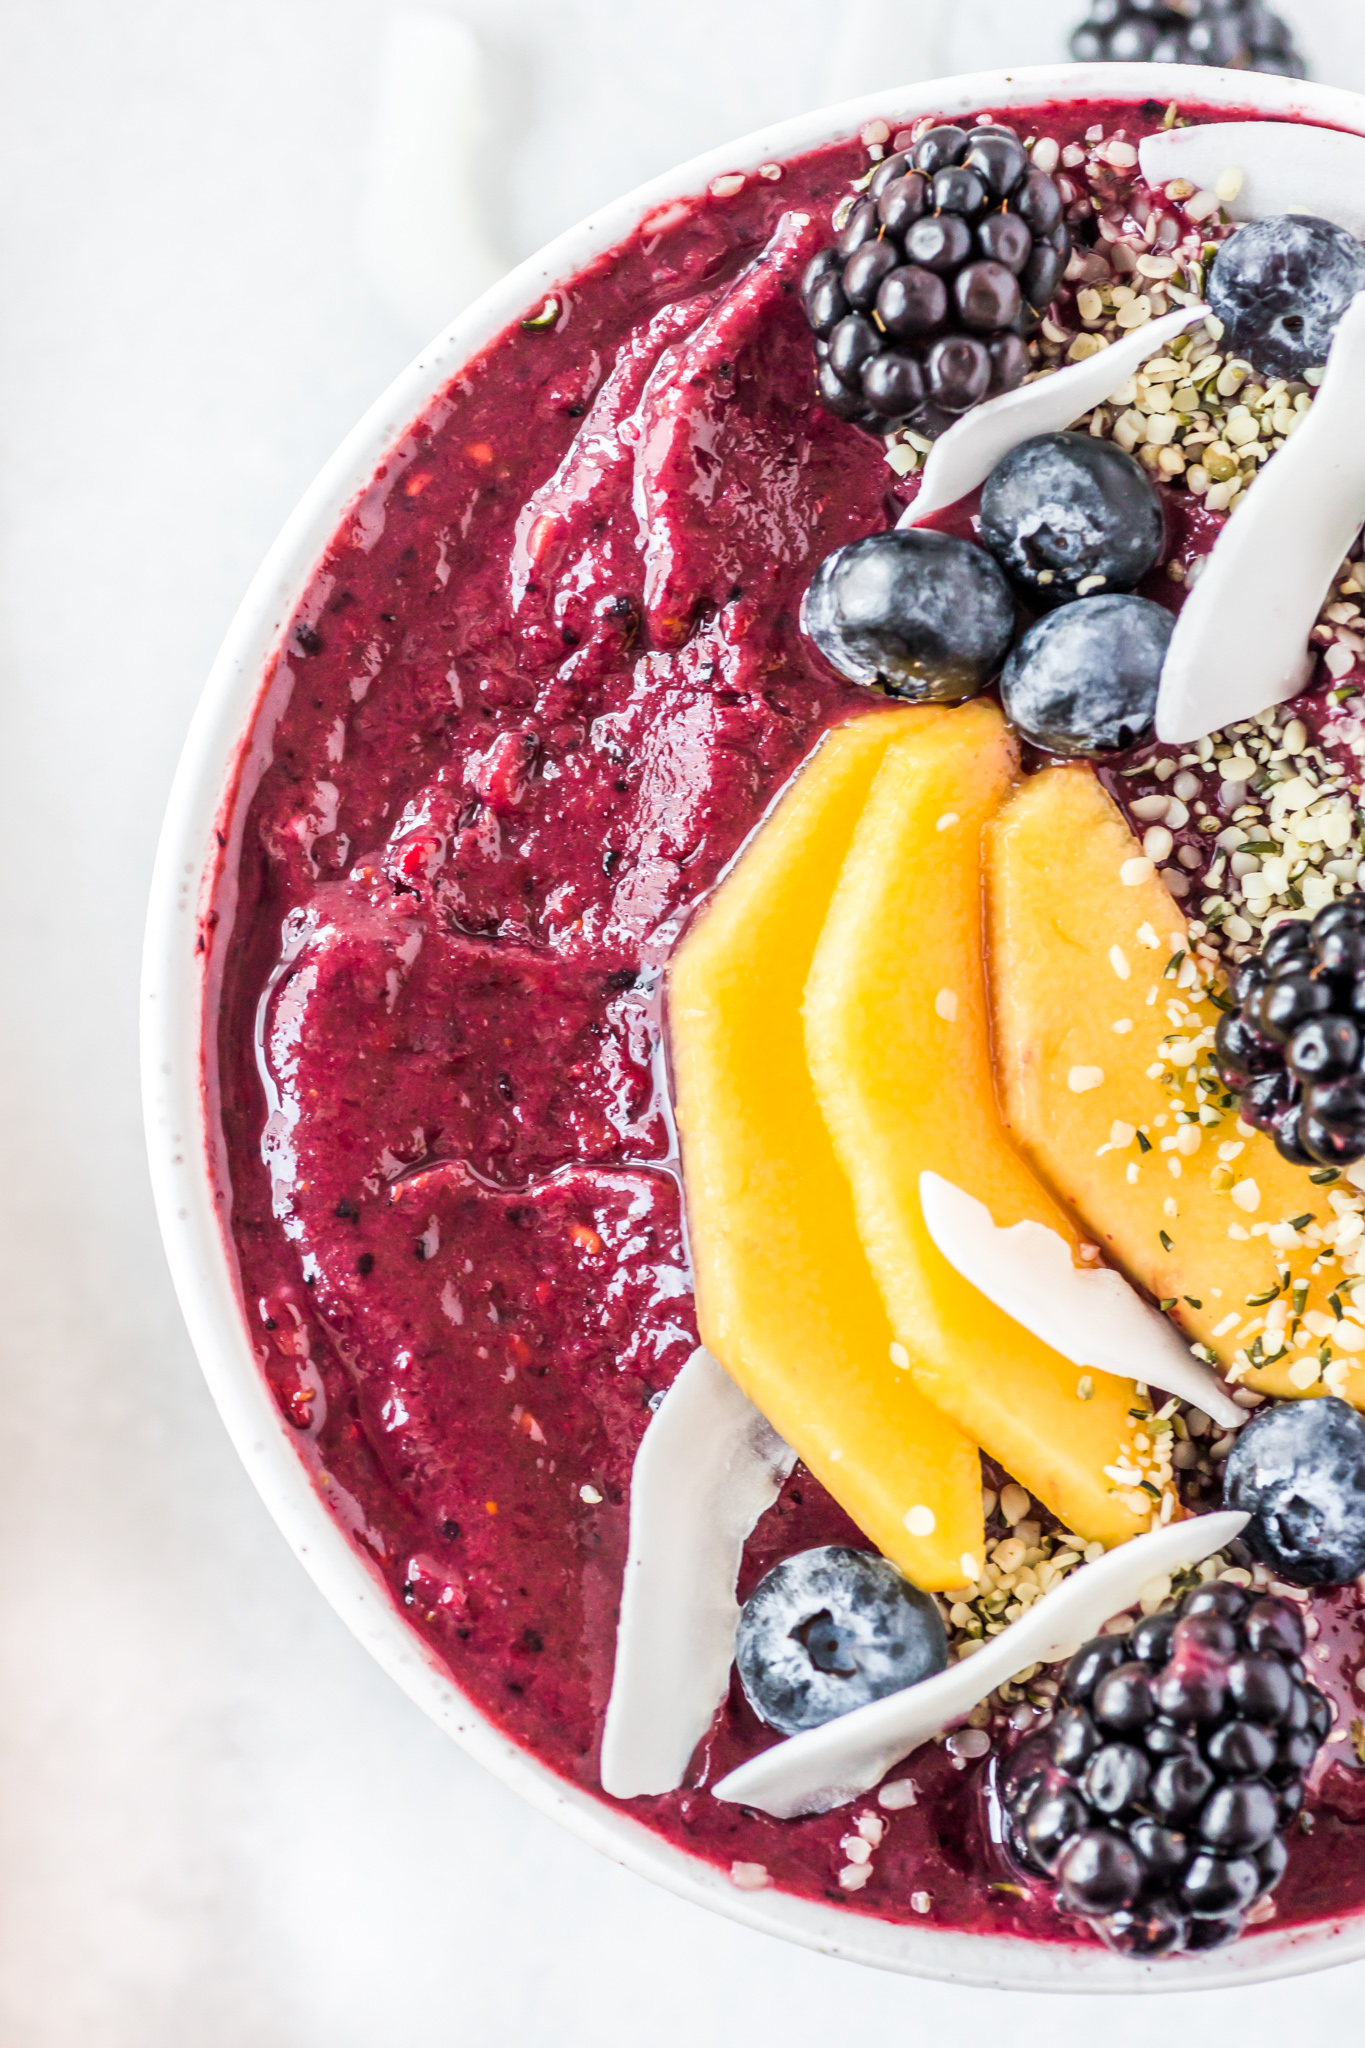 Acai Bowl - a healthy smoothie bowl way to start to the day!